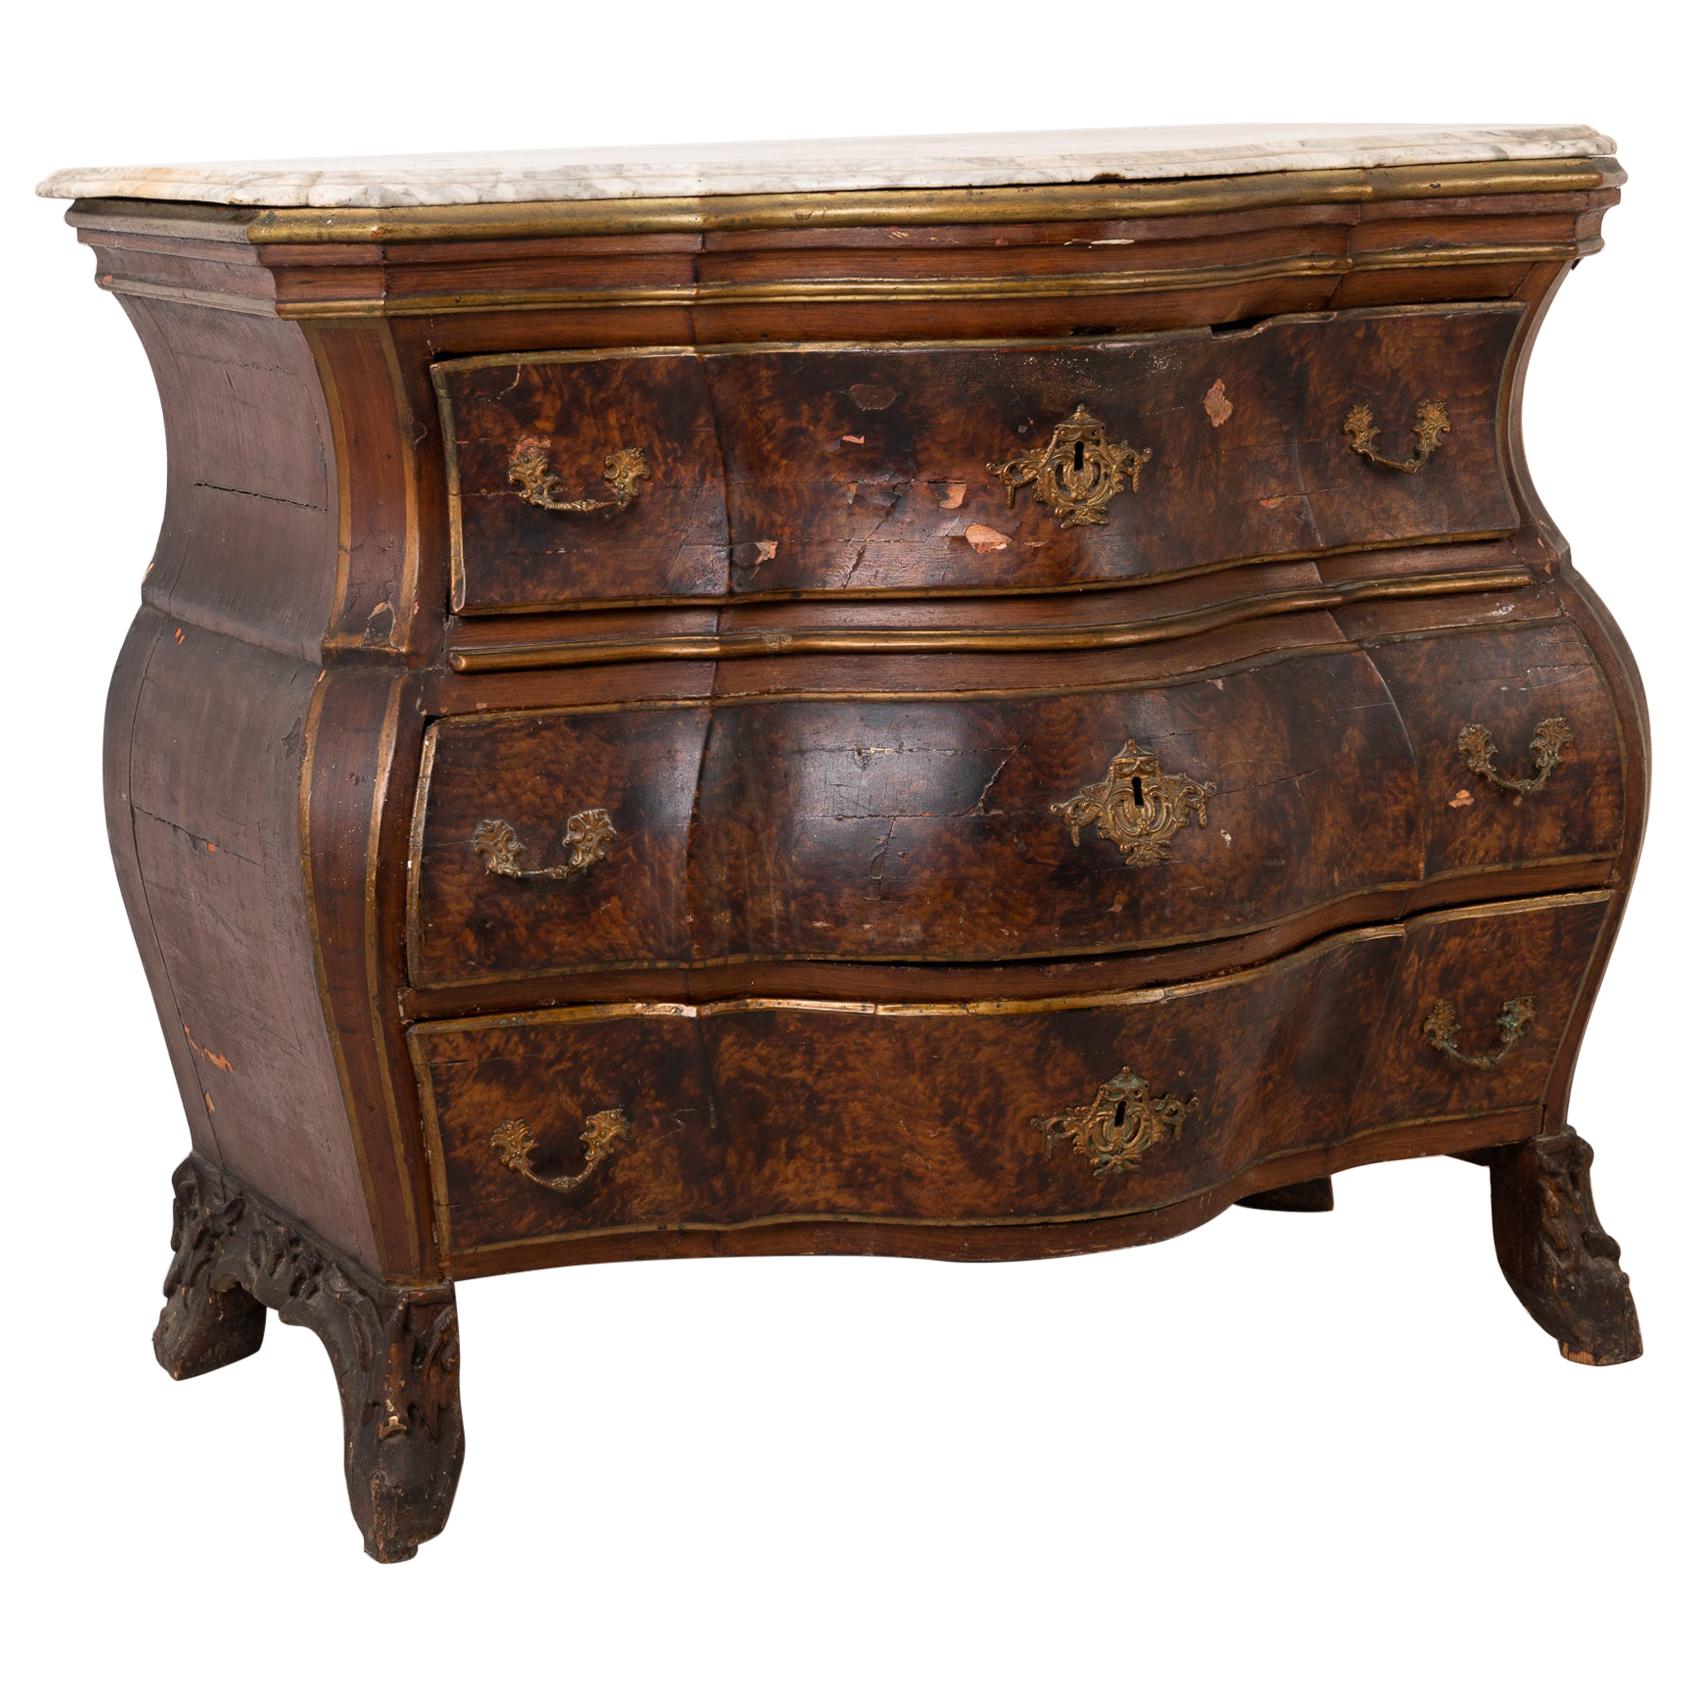 Authentic 18th Century Swedish Rococo Chest of Drawers